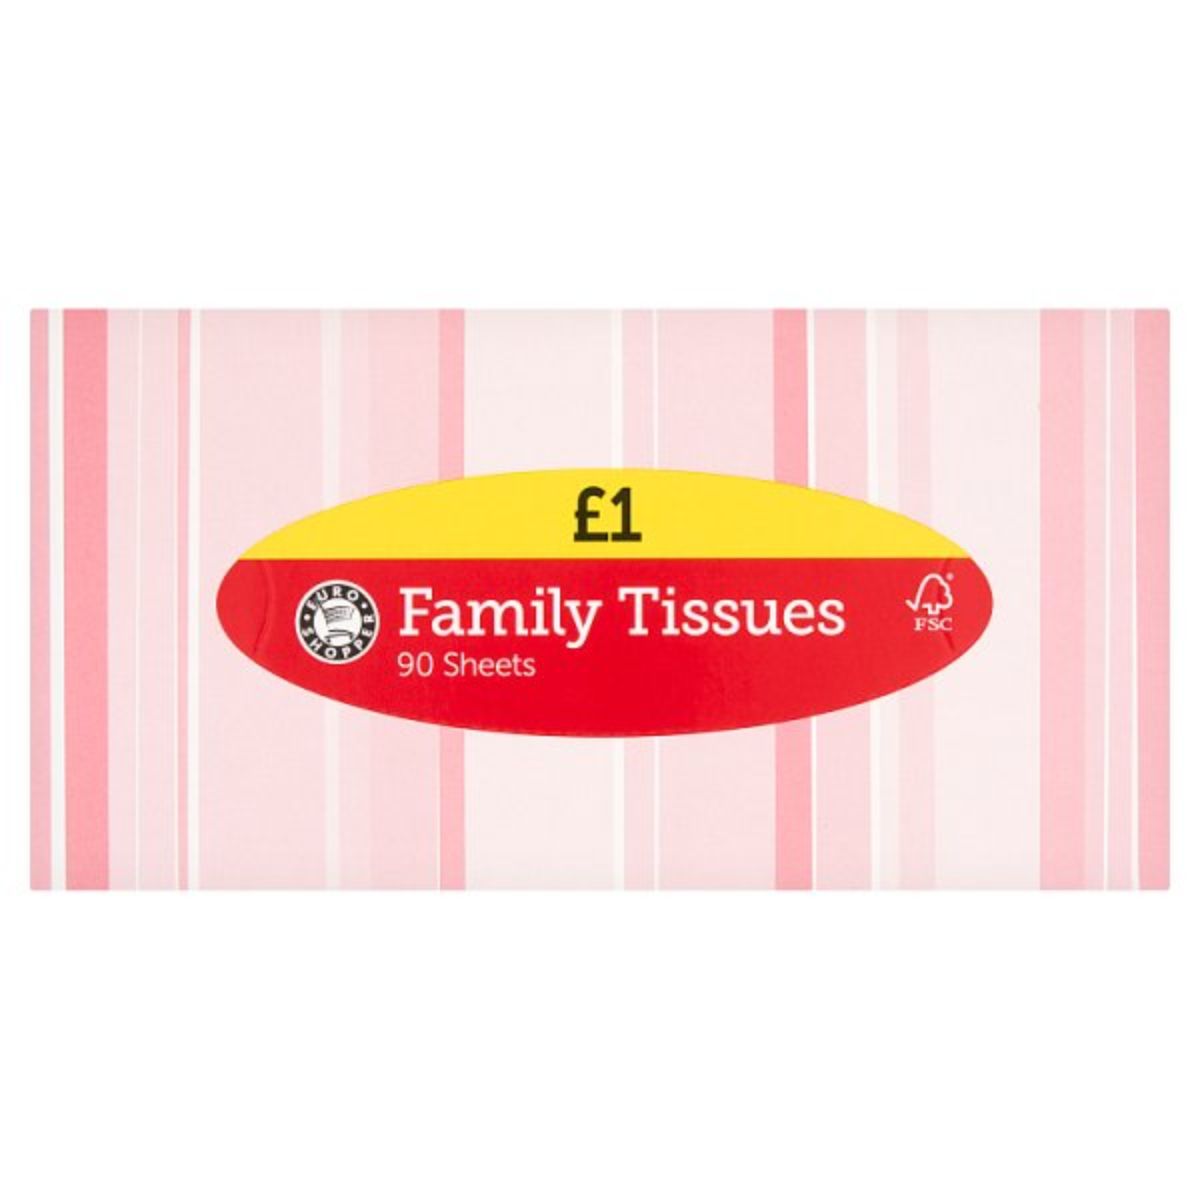 A pink and white striped tissue with the words Euro Shopper - Family Tissues - 90 Sheets on it.